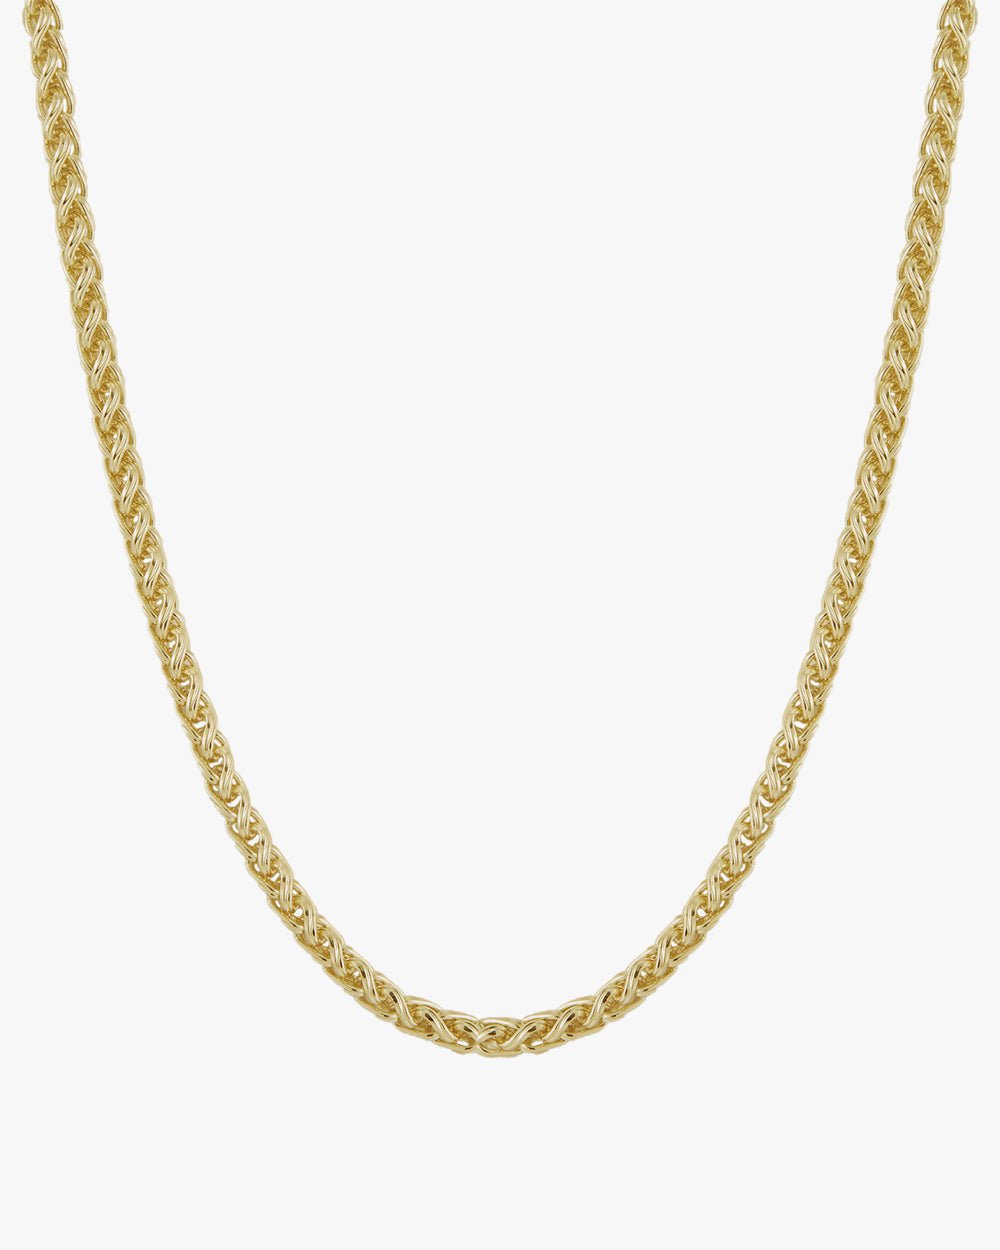 SUZANNE TWISTED STATEMENT CHAIN - Shop Cupcakes and Cashmere